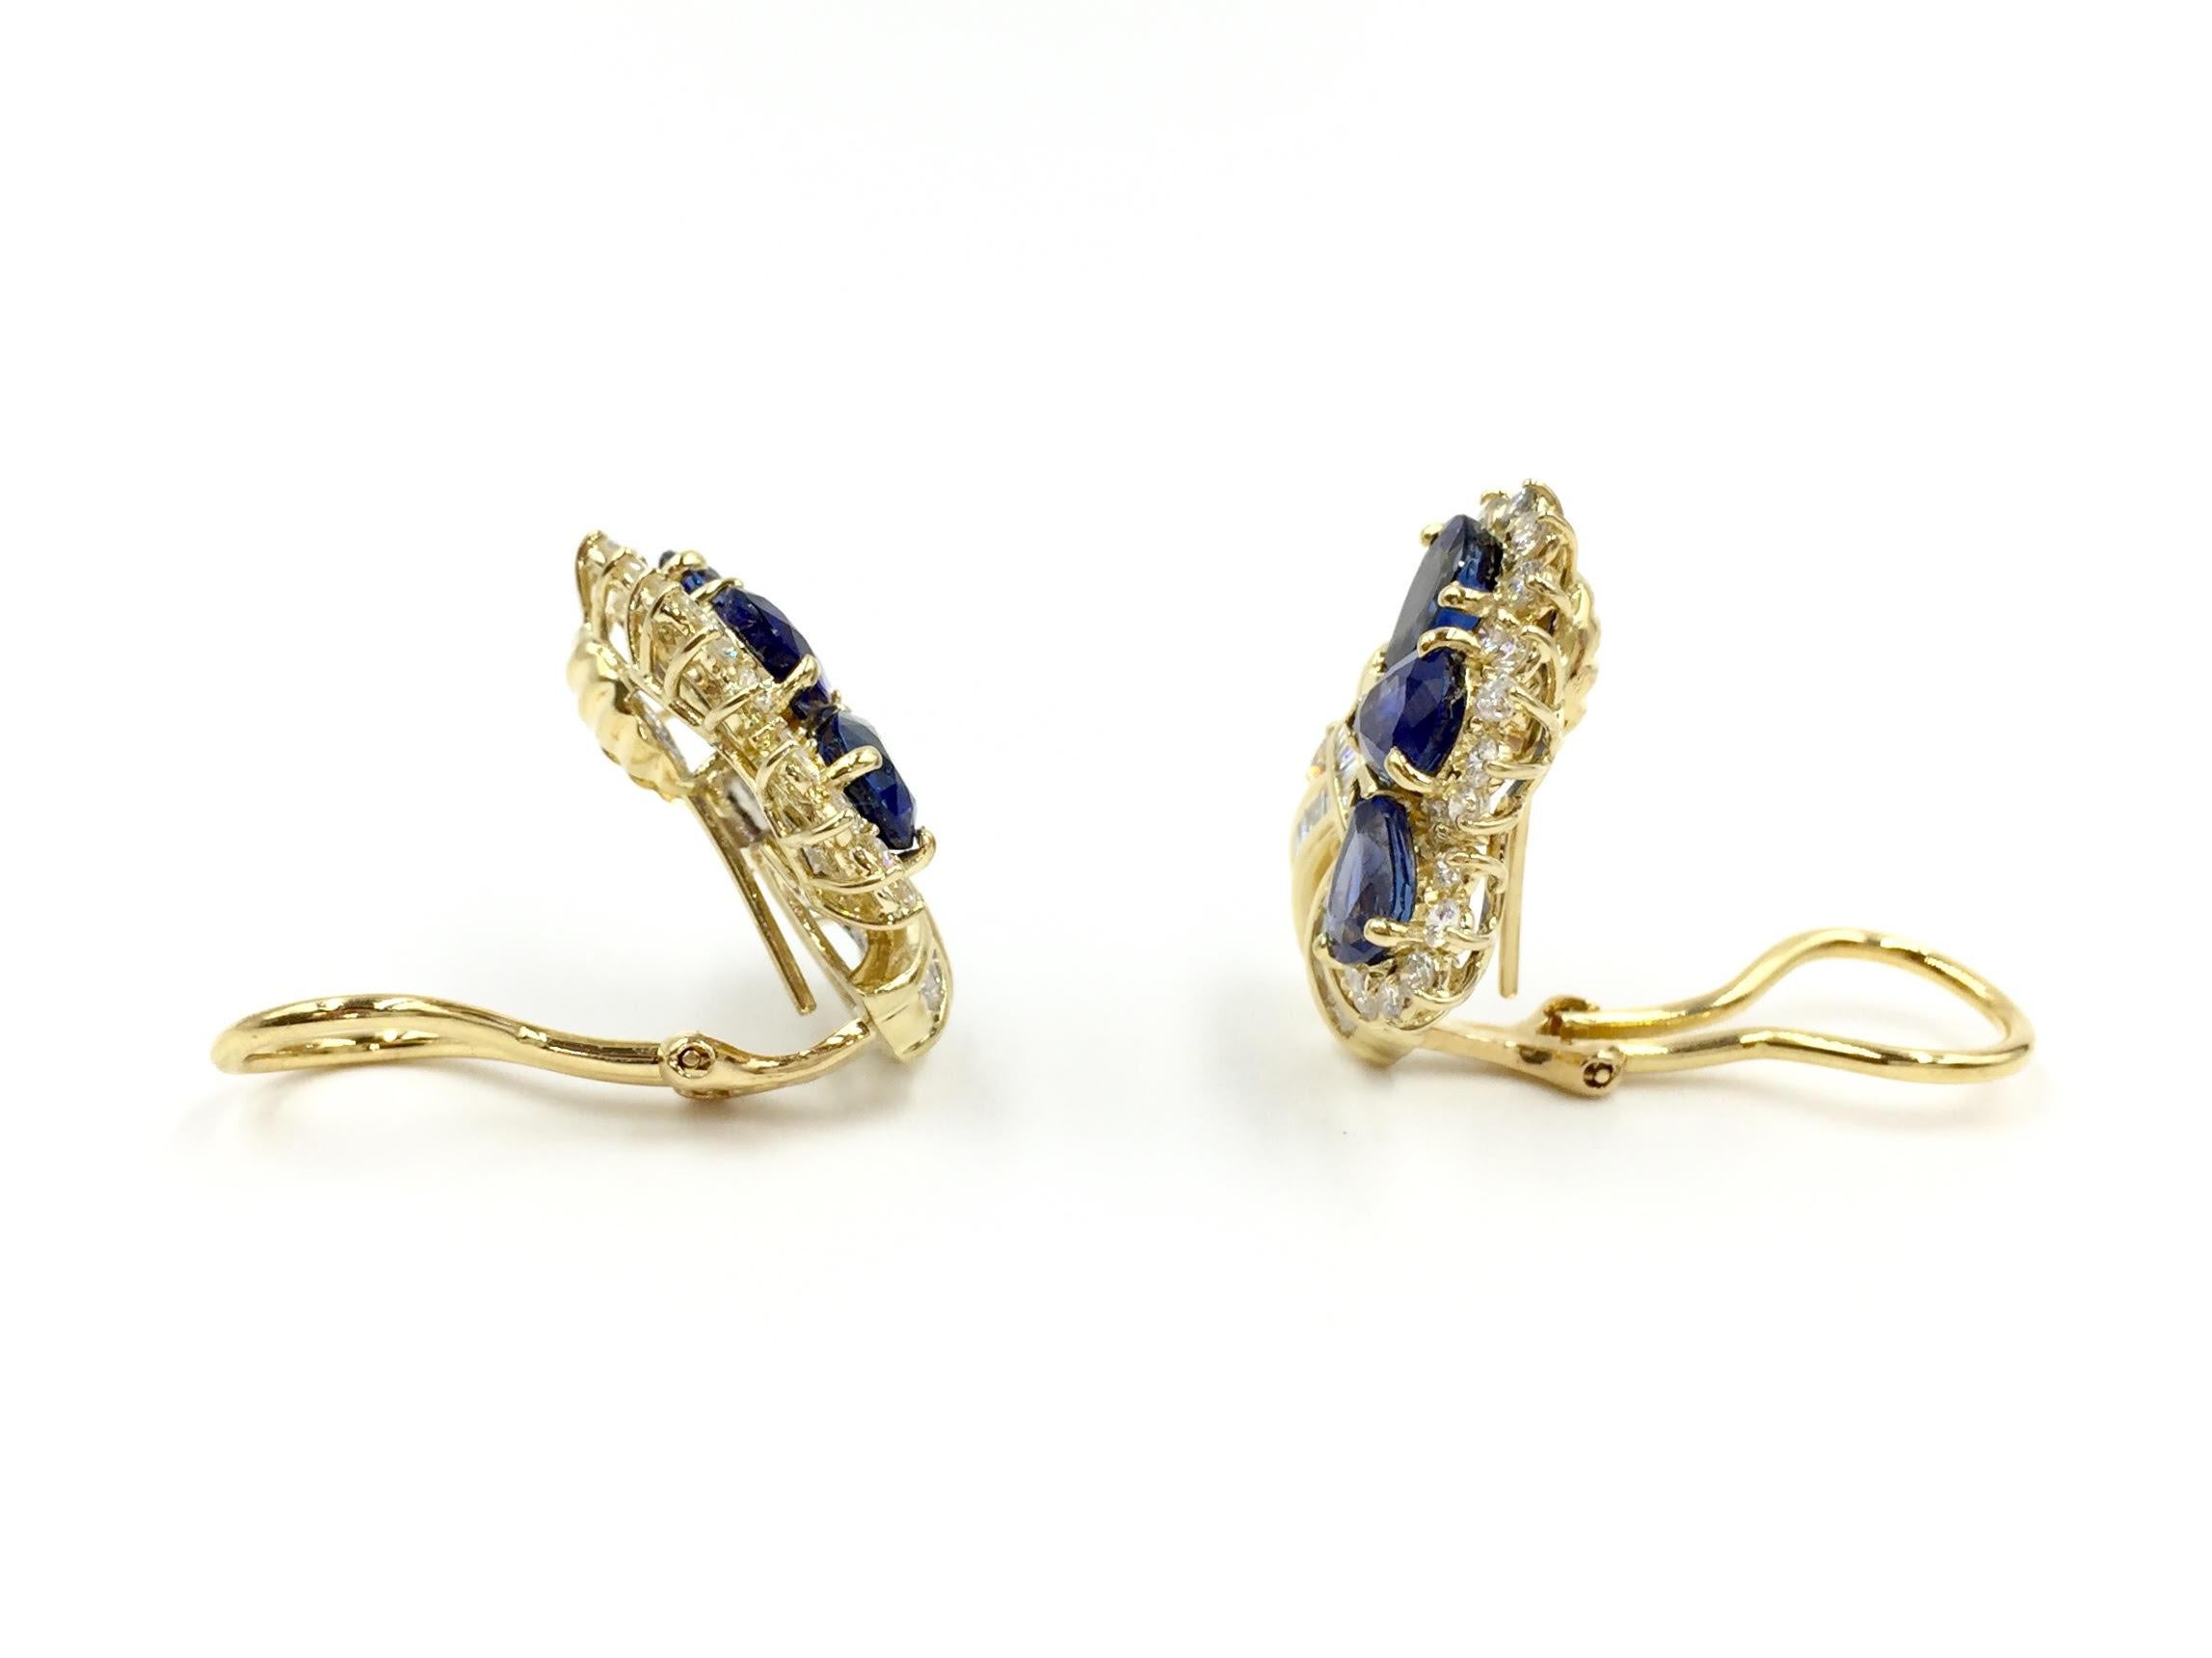 Vintage Sapphire and Diamond 18 Karat Earrings In Excellent Condition For Sale In Pikesville, MD